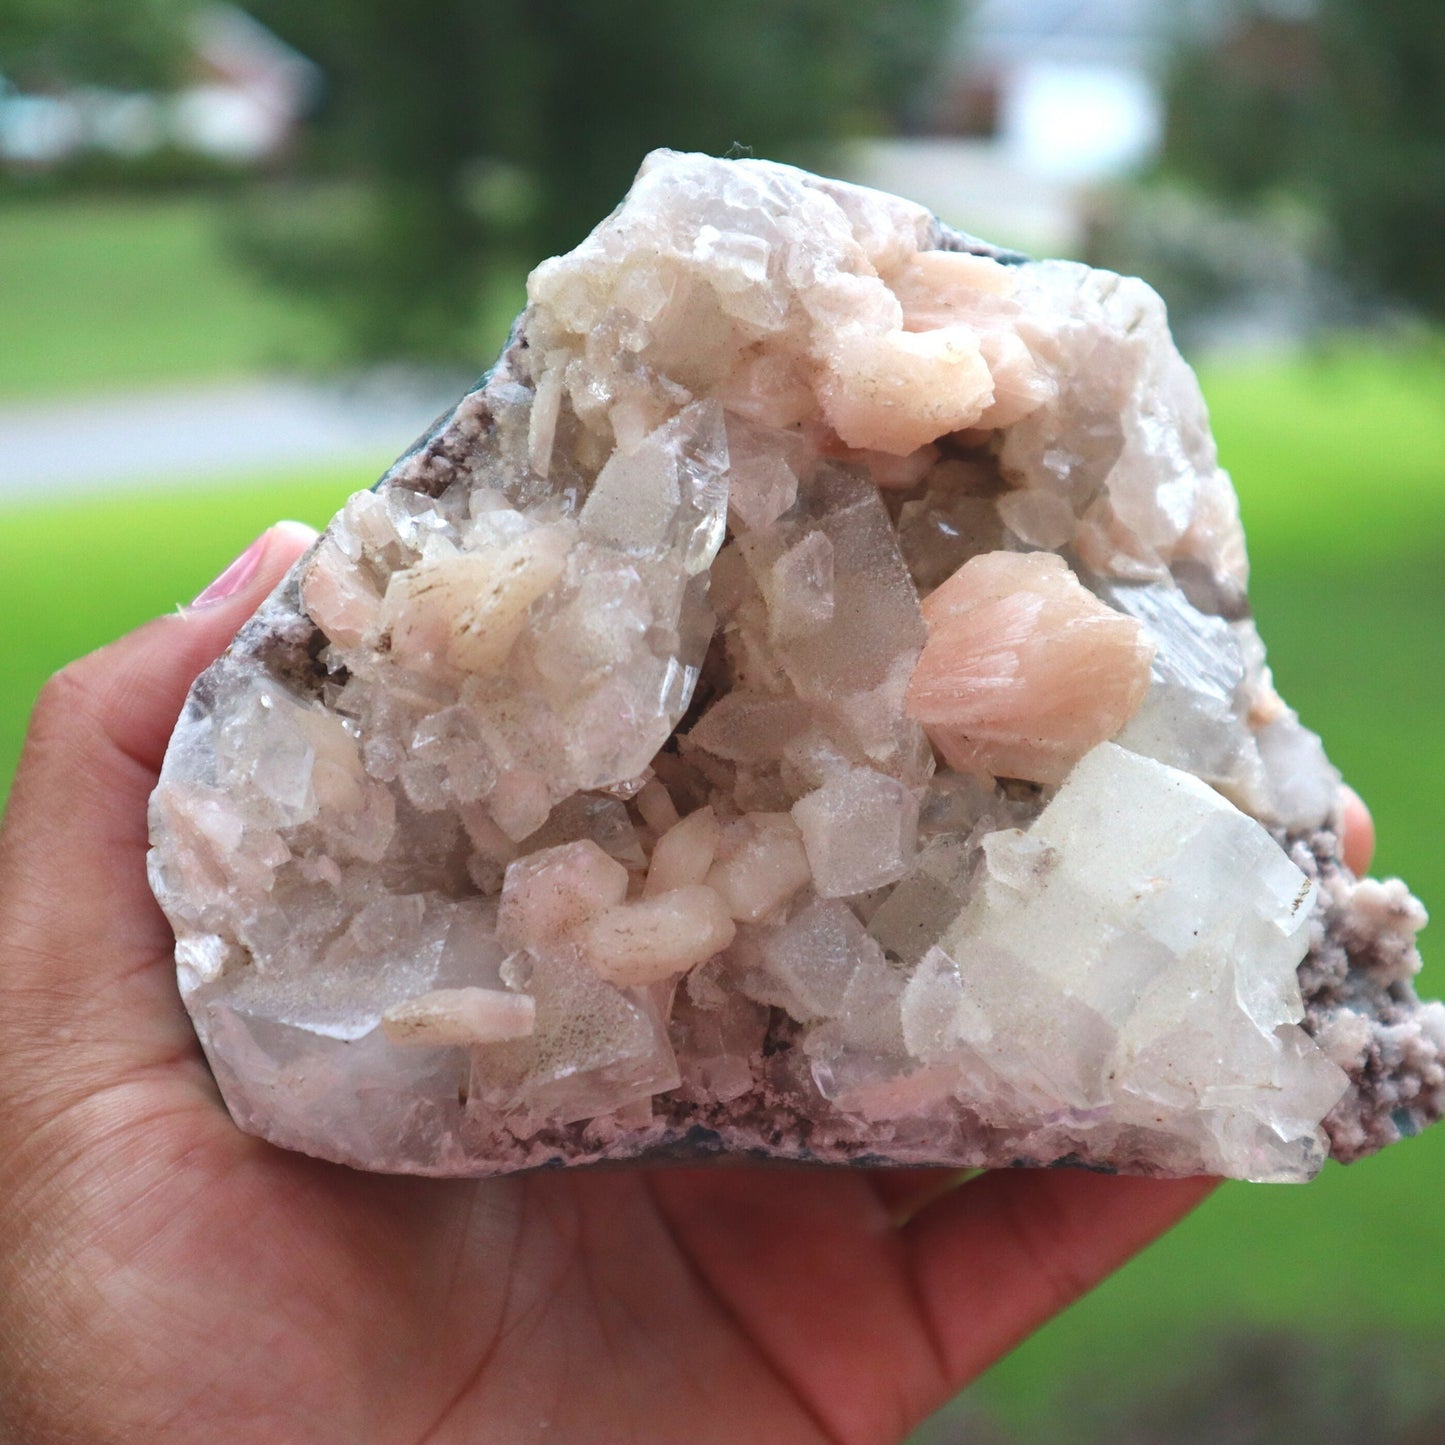 Water Diamond Apophyllite and Stilbite, Peach Apophyllite Crystal Cluster, Crystal Collection Statement Piece, Crystal Healing, Raw Crystal